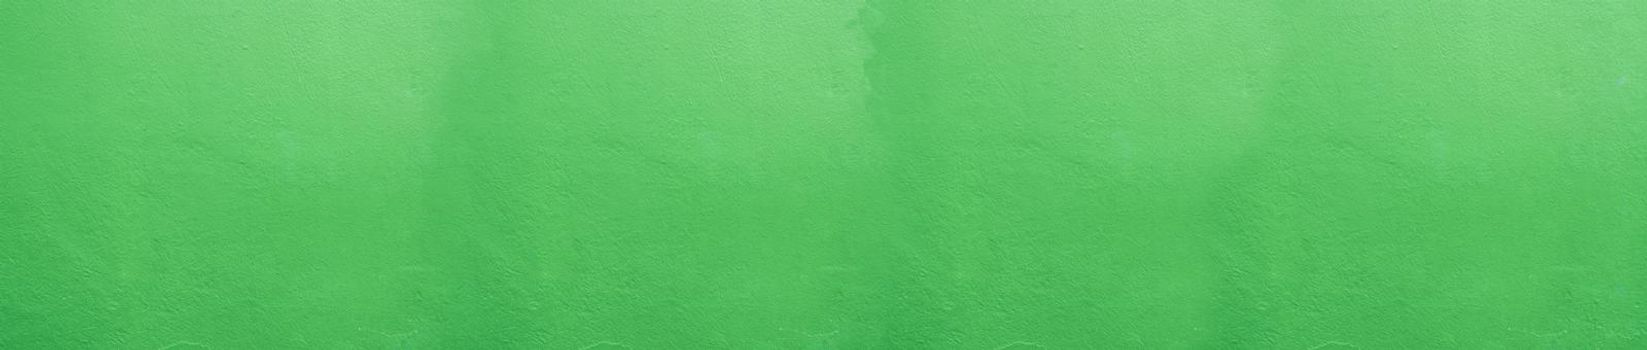 Panoramic Wide angle Vintage textured stucco wall background. green stucco wall. Background of a green stucco coated and painted exterior, rough cast of cement and. Abstract  wall grunge stone.